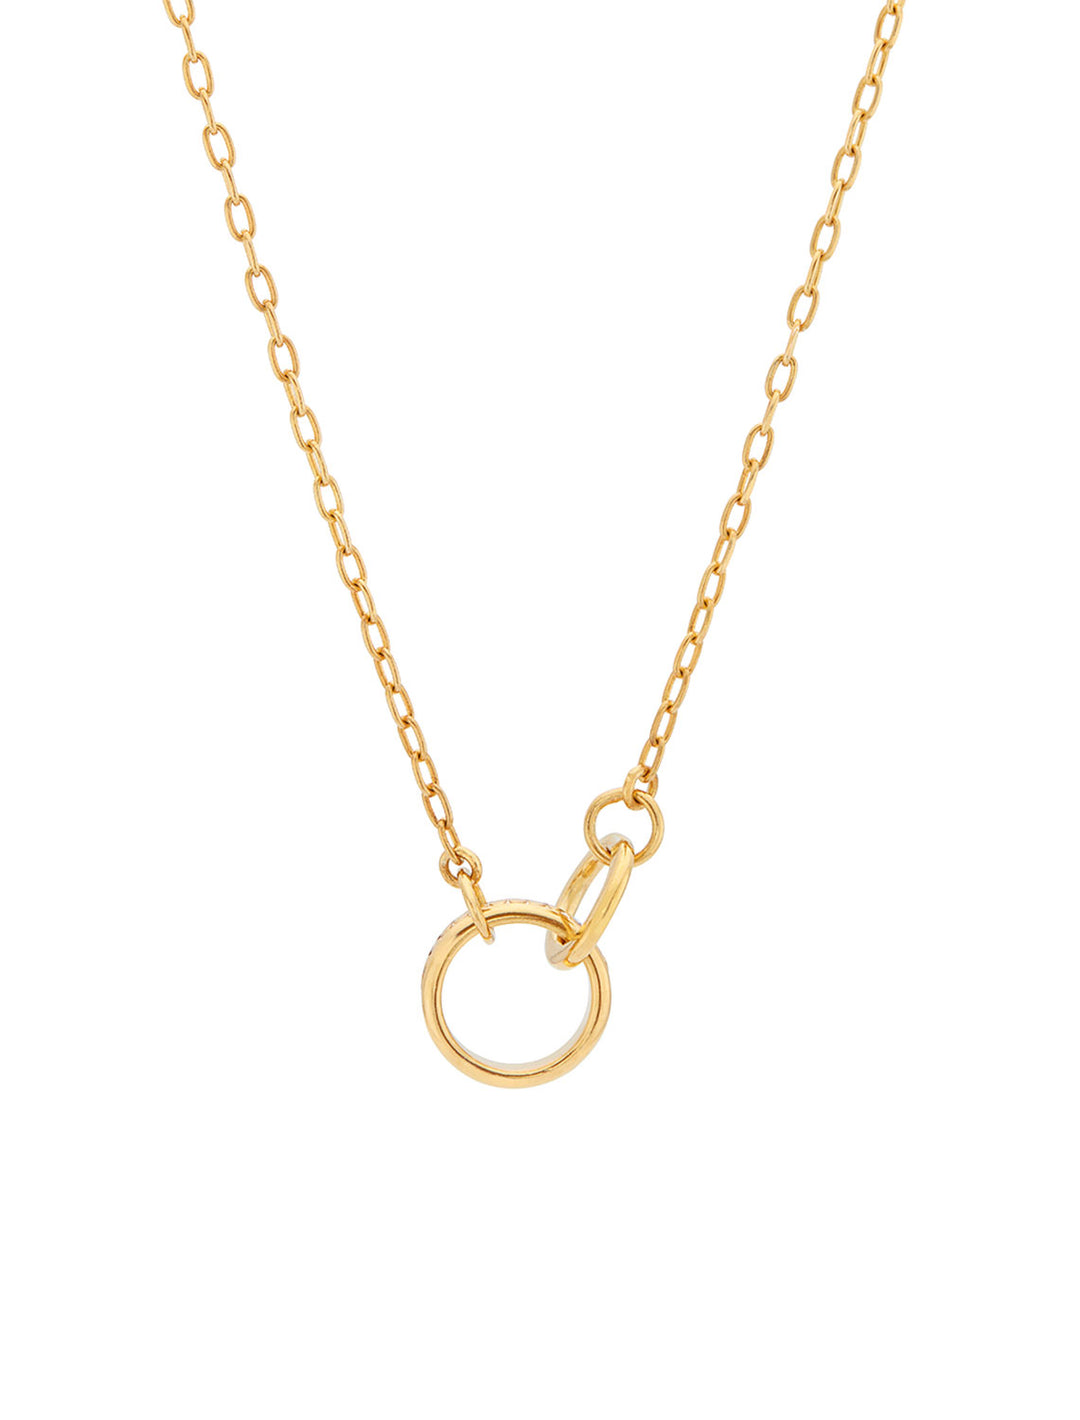 Front view of Anna Beck's intertwined circles charity necklace in gold.